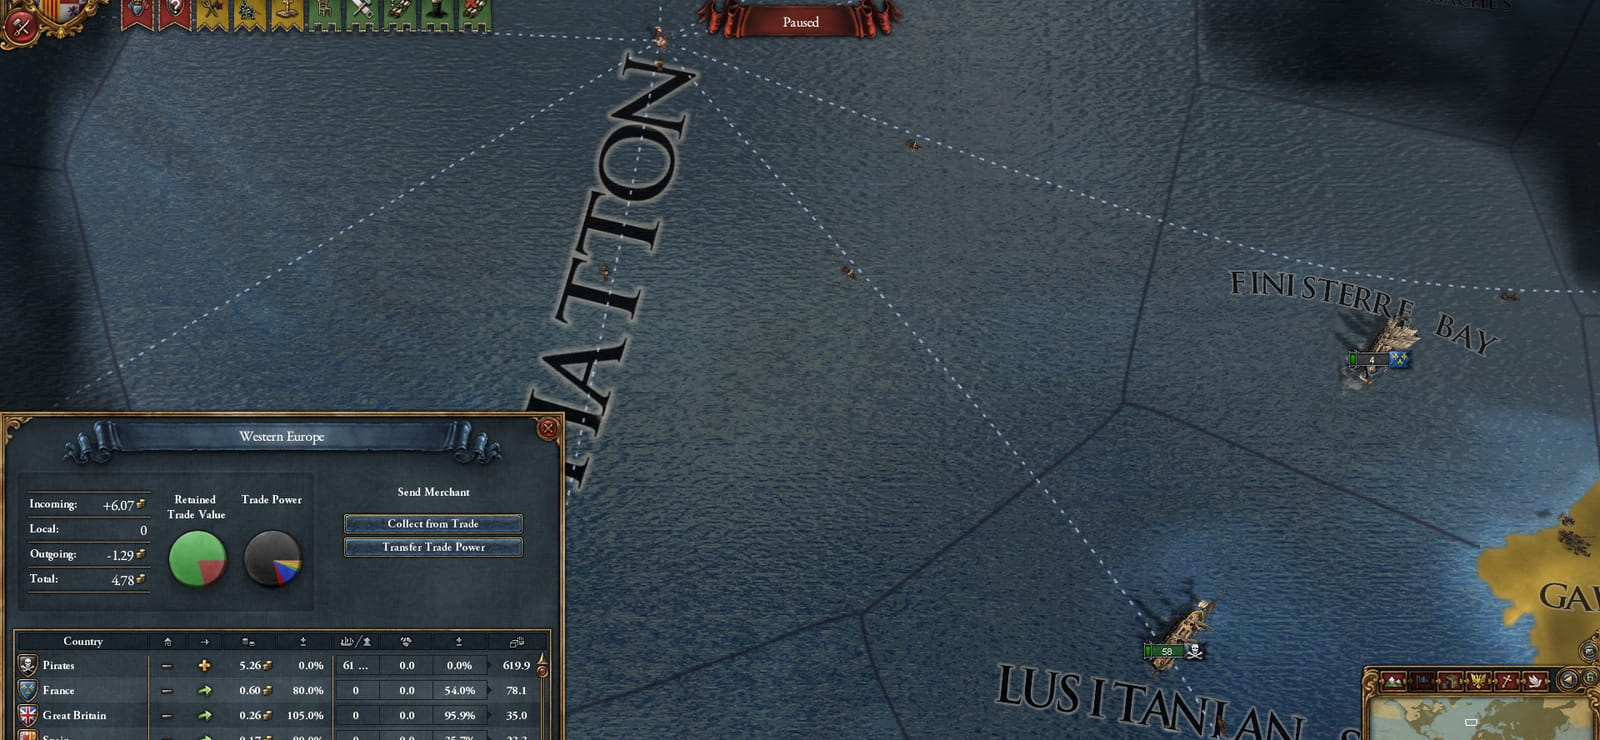 Expansion - Europa Universalis IV: Wealth Of Nations